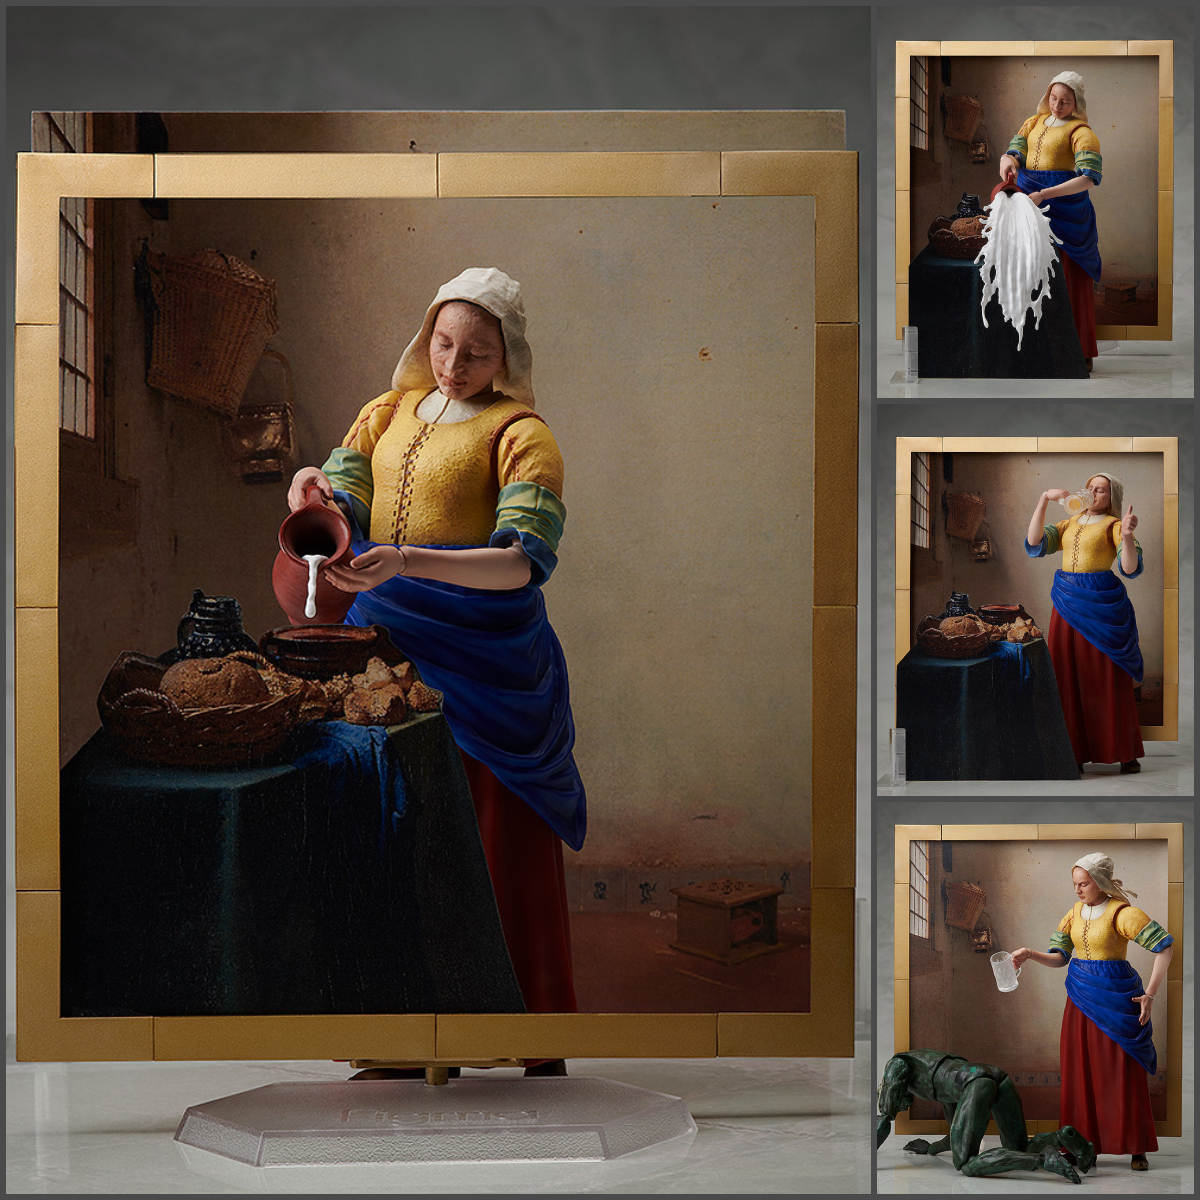 From the popular art series 'The Table Museum' comes a figma of The Milkmaid by Vermeer. Preorder today!

Shop: s.goodsmile.link/hJM

#TheTableMuseum #Goodsmile